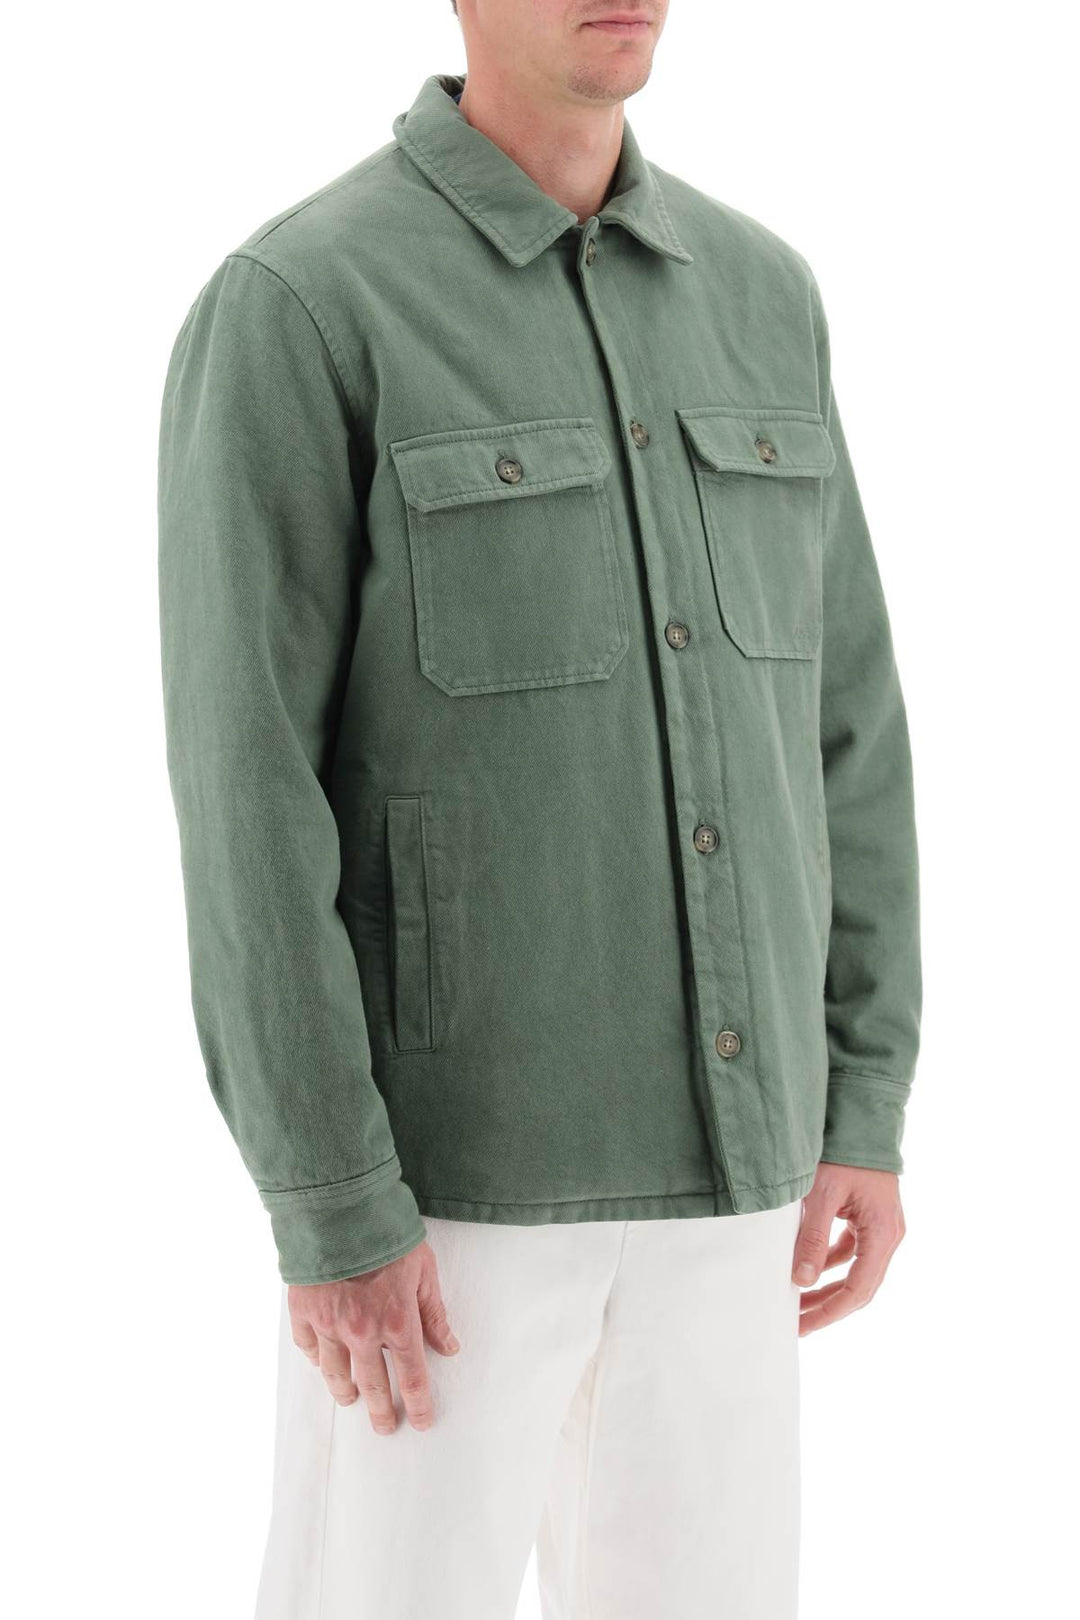 A.P.C. Alessio Padded Overshirt   Green